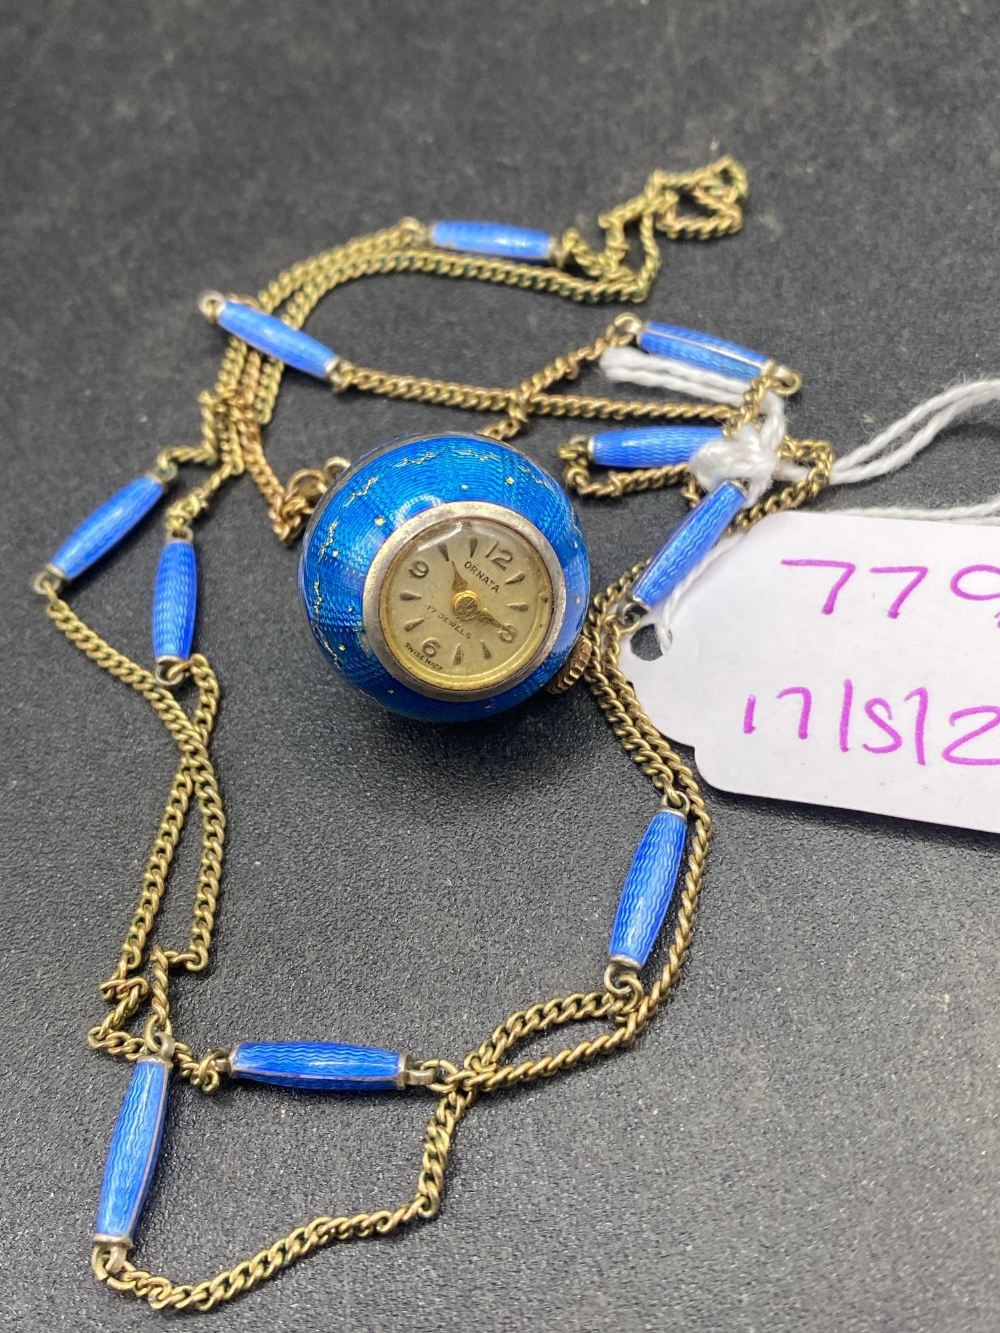 A silver and enamel ball watch by ORNATA with neck chain